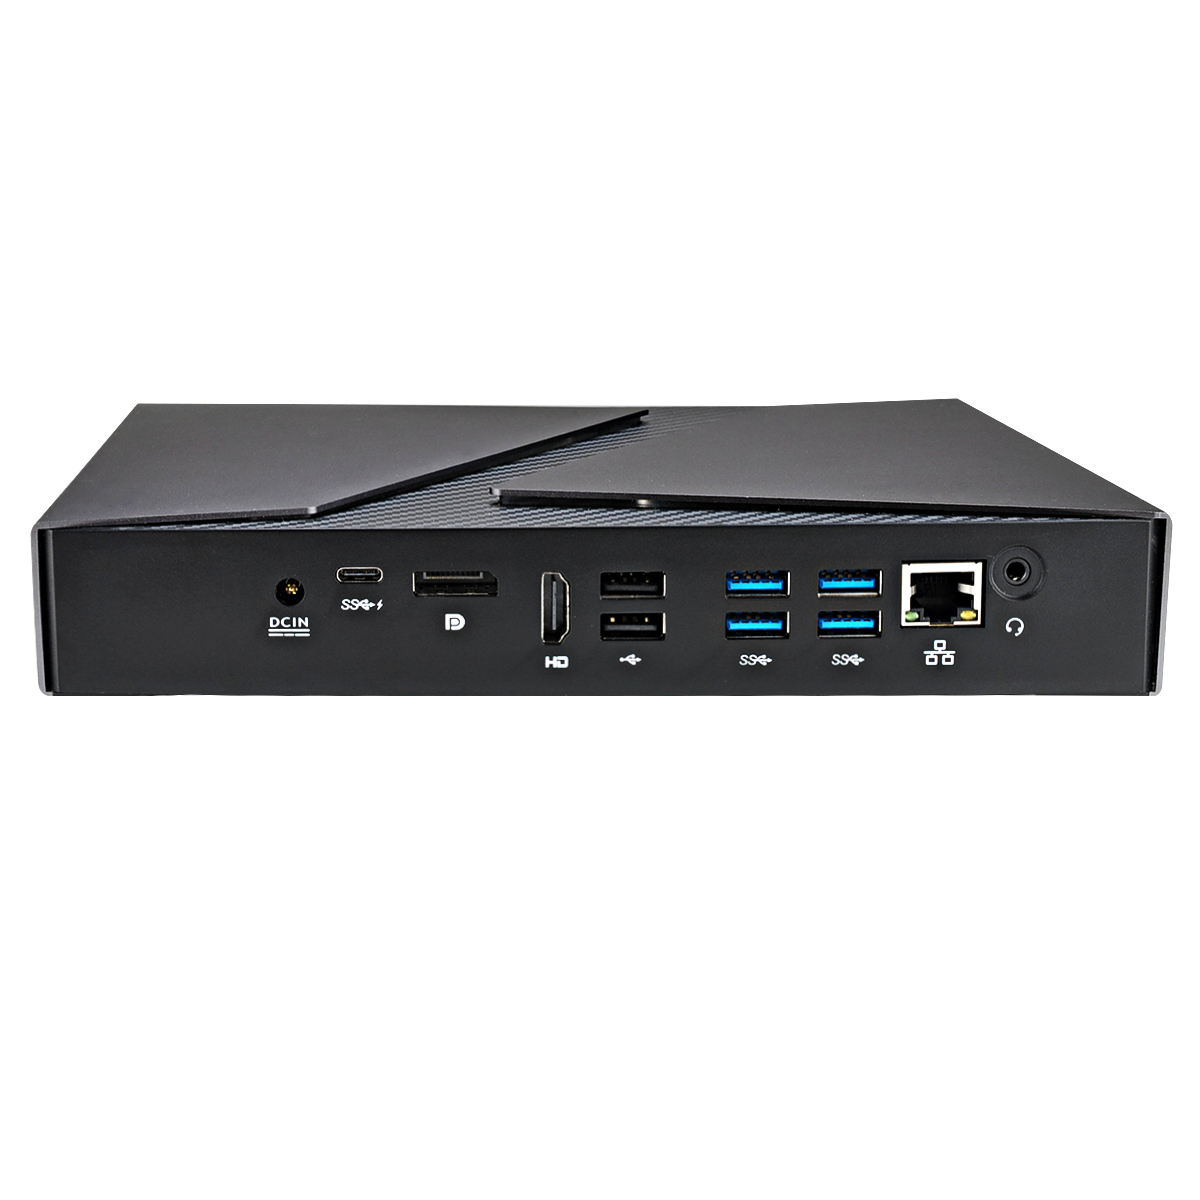 Find NVISEN Y GX01 Mini PC Intel Core I7 9750H 16GB DDR4 512GB SSD Gaming PC Quad Core 2 4GHz to 4 1GHz NVIDIA GTX 1650 DDR4 2 Slot M 2 2280 SSD 2 5inch SATA HDMI DP Type C for Sale on Gipsybee.com with cryptocurrencies